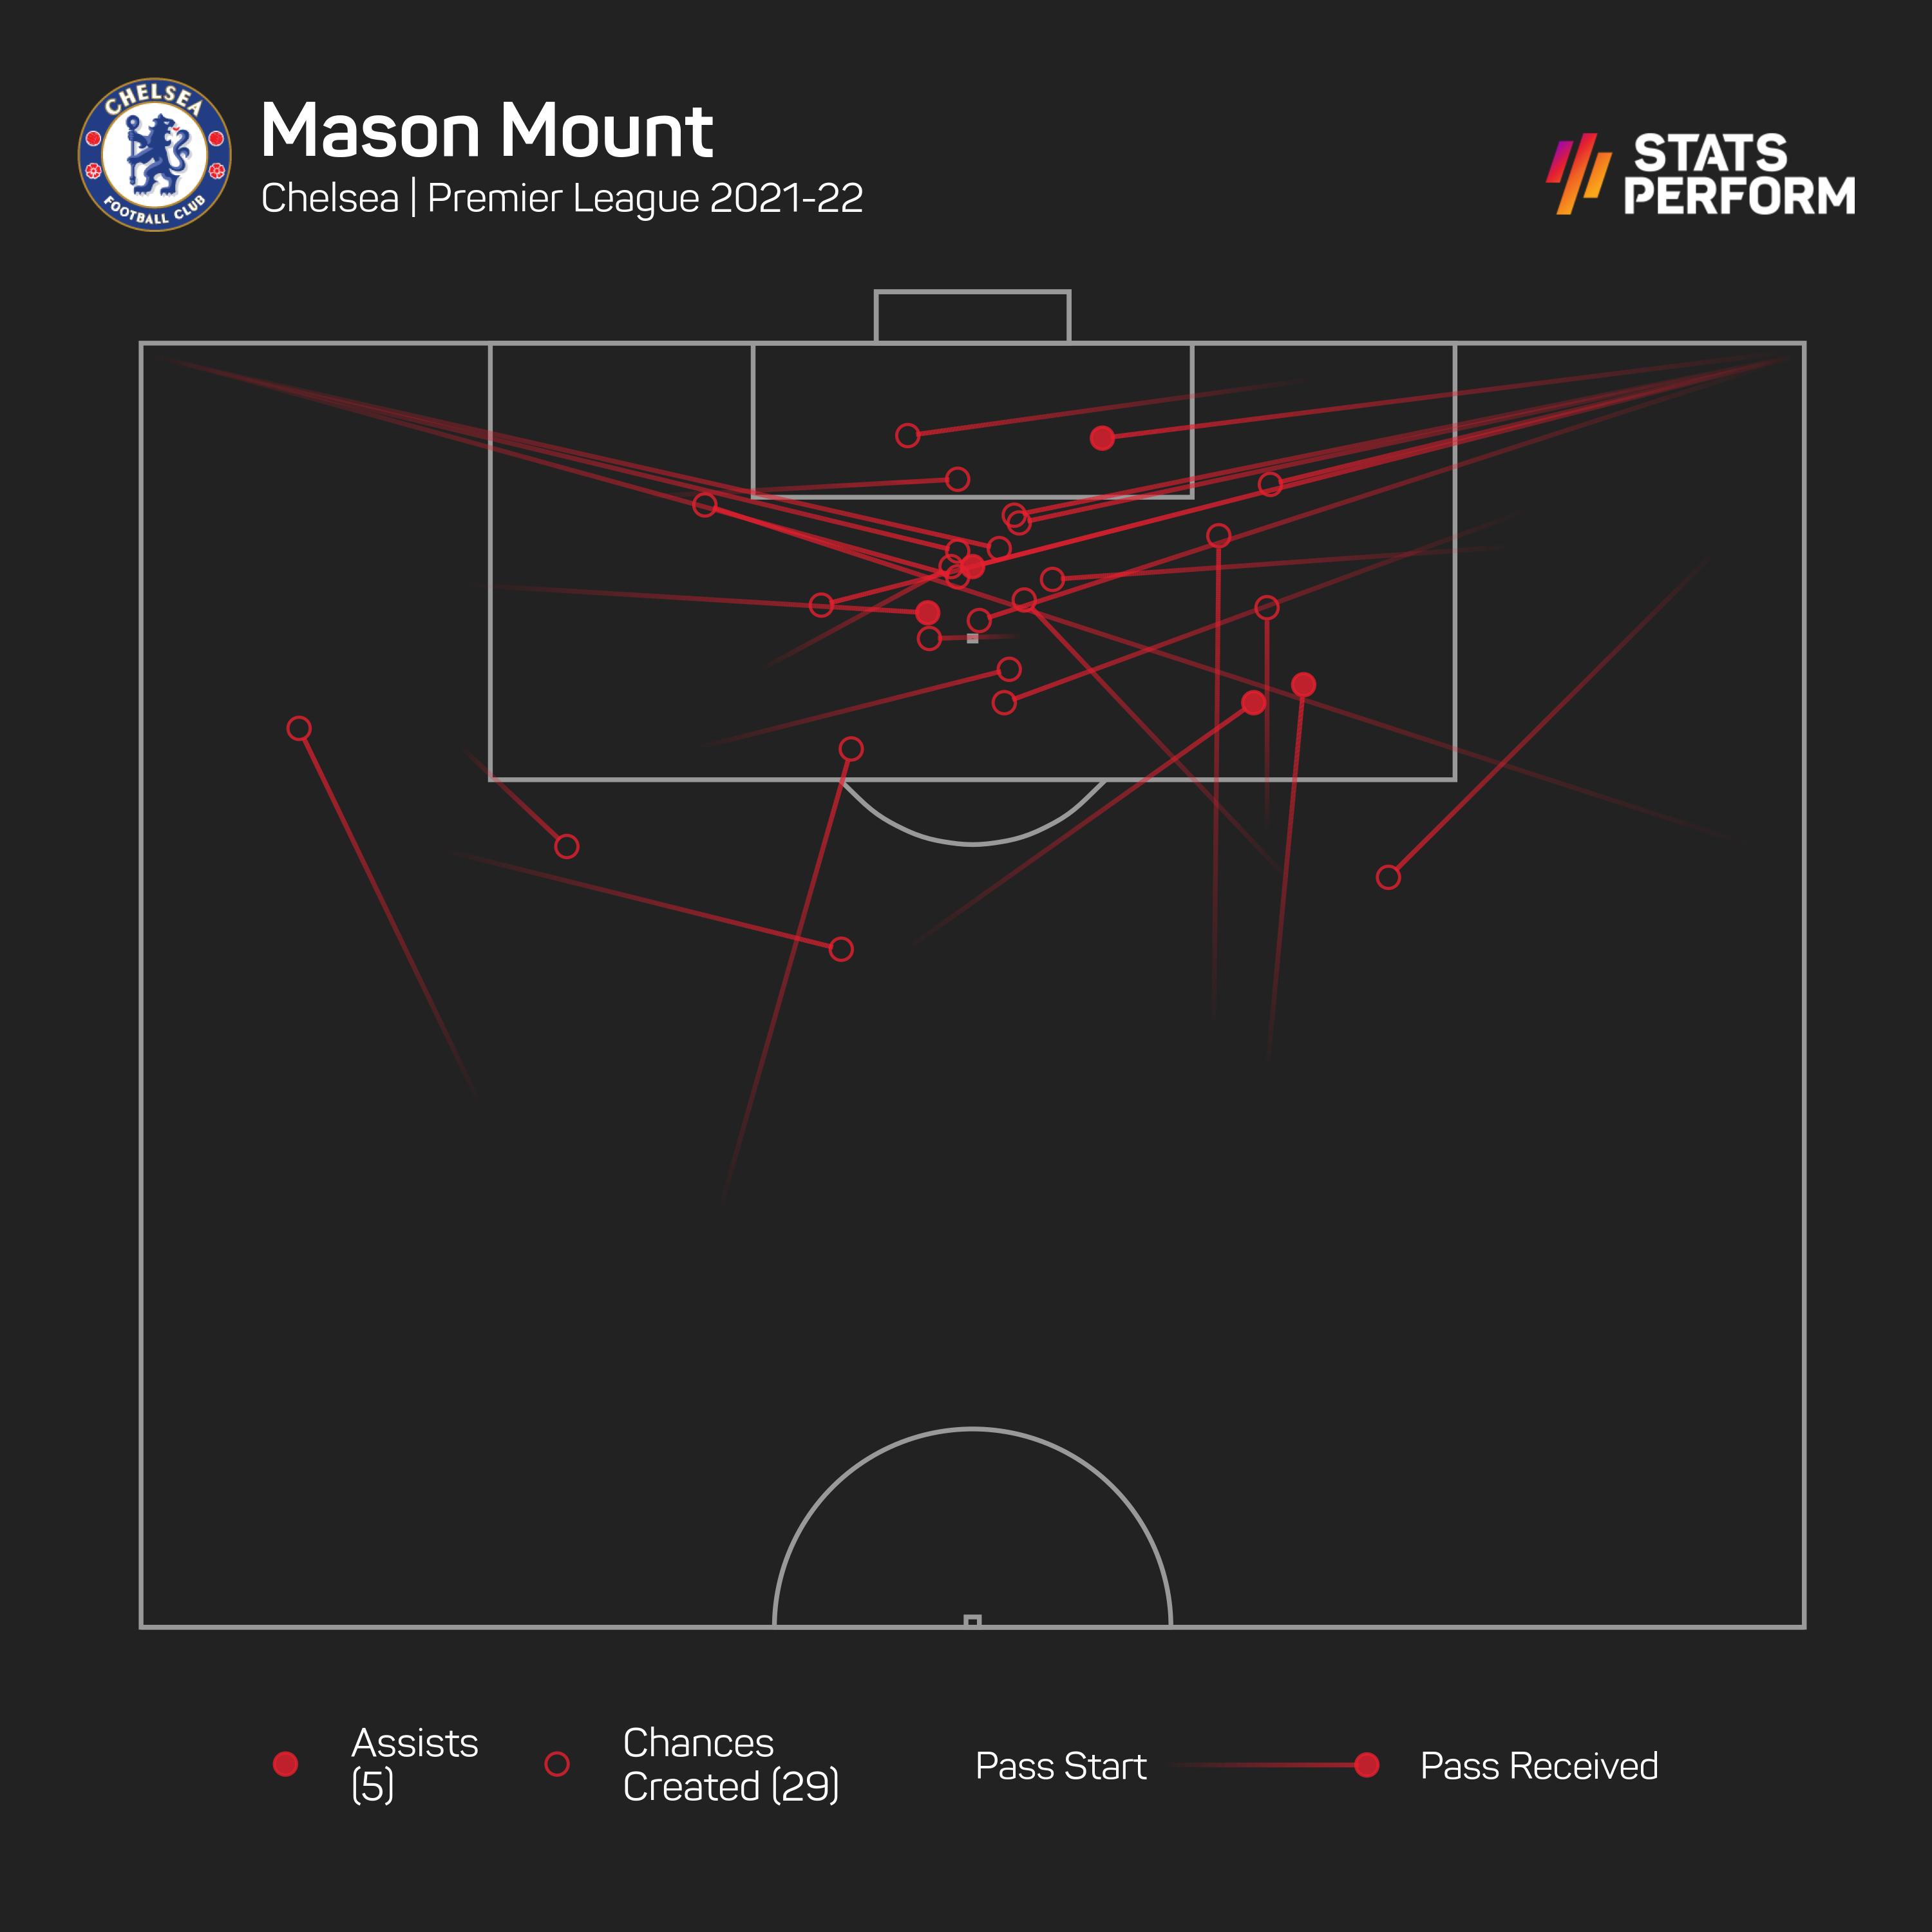 Mason Mount has created 29 chances for Chelsea in the league